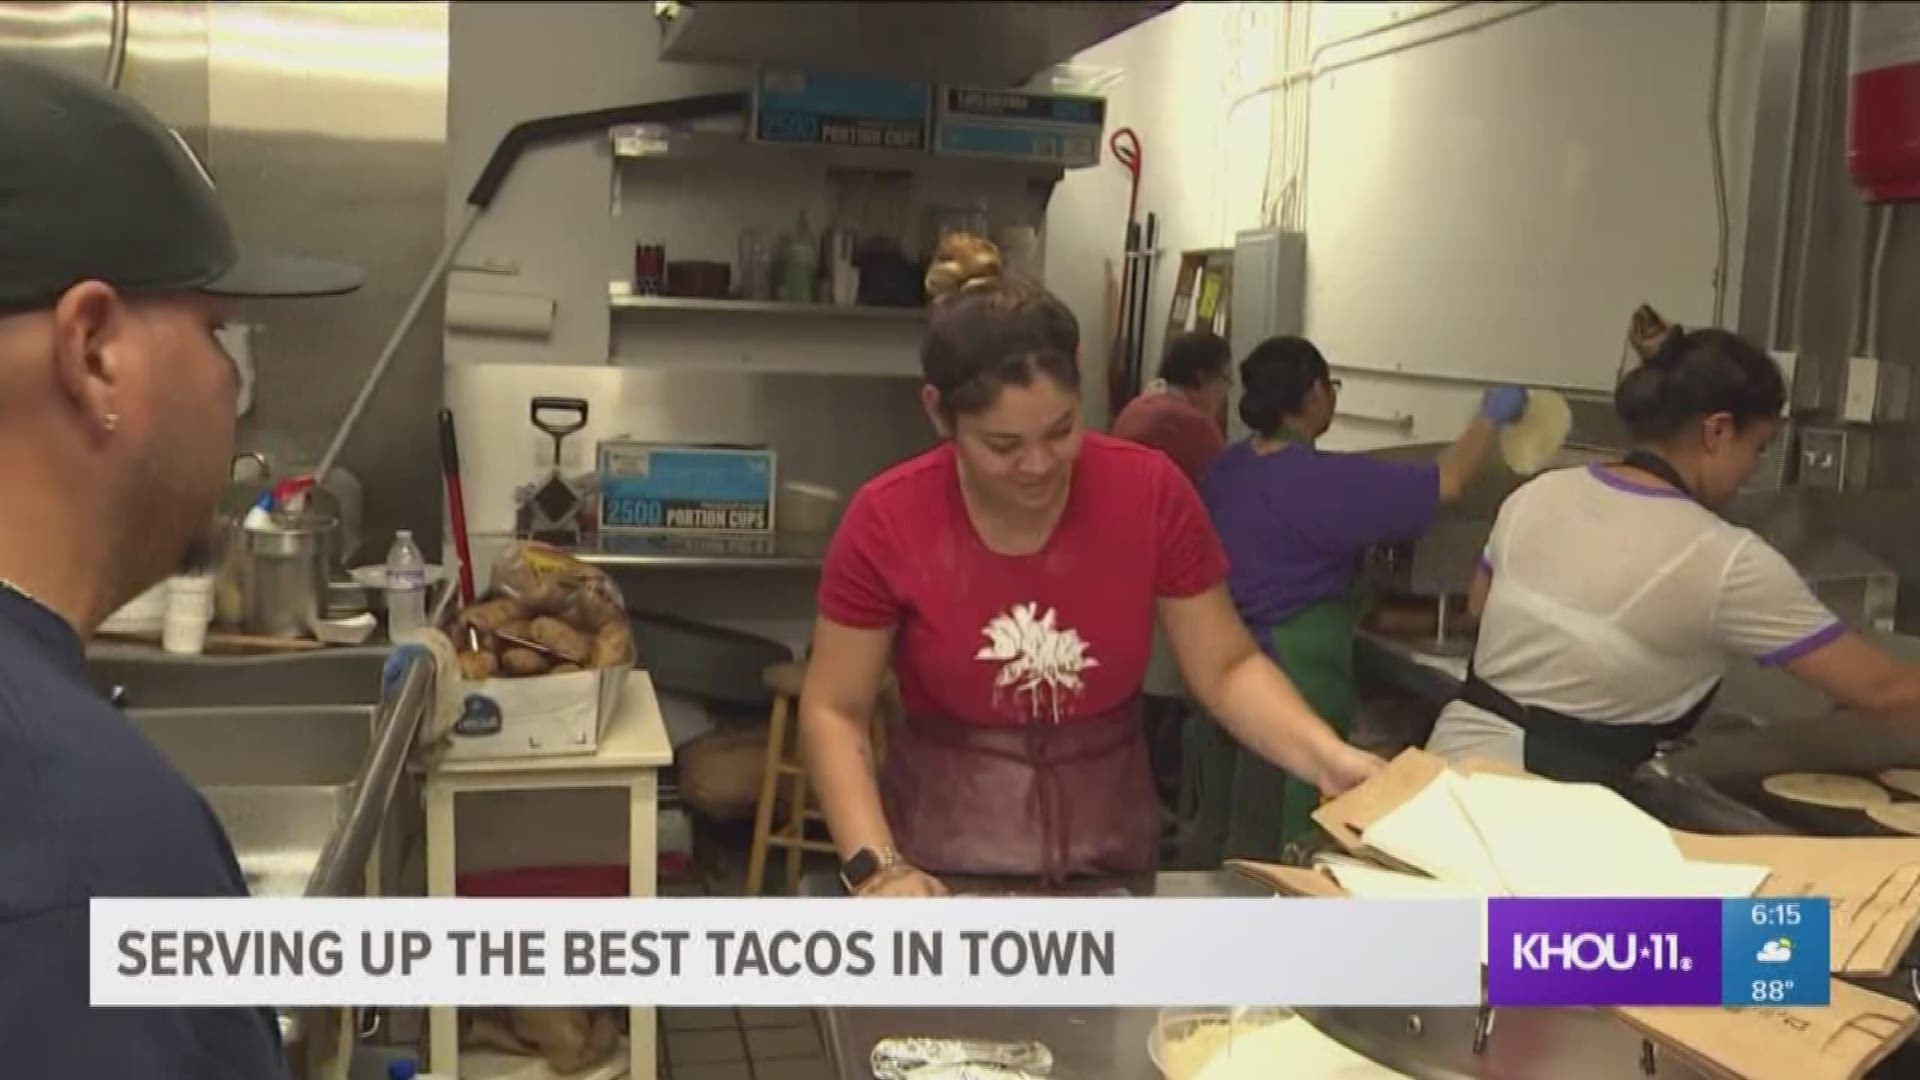 It's National Taco Day, and the KHOU Facebook page is buzzing with your suggestions on where the best tacos in town can be found. We headed to spots around the Greater Houston area to try some of the best spots.